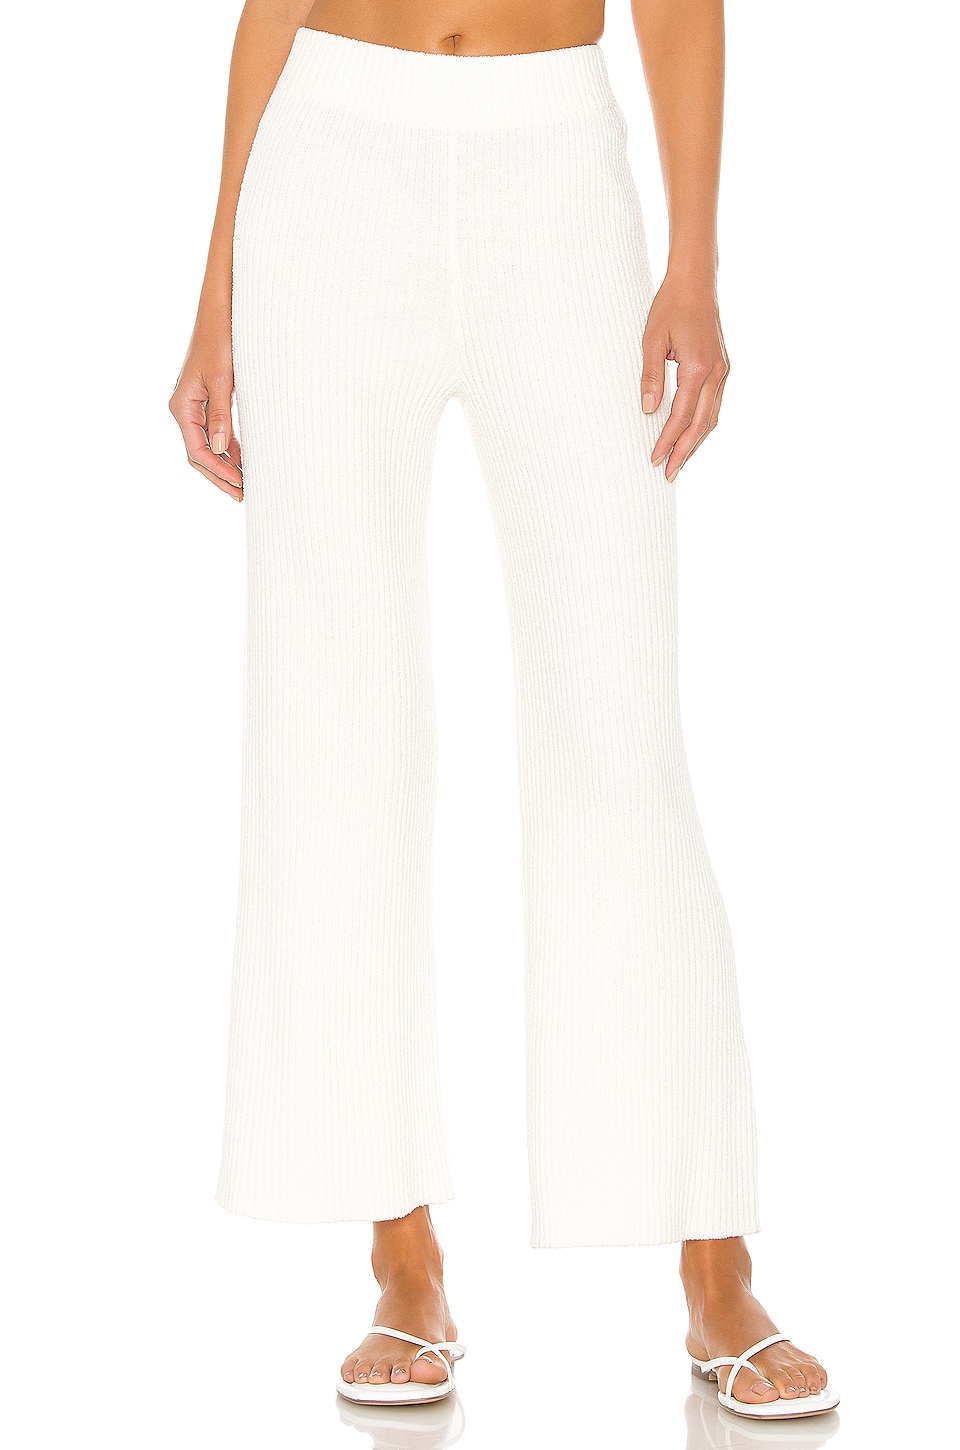 Lovers and Friends Catalina Pant Camel